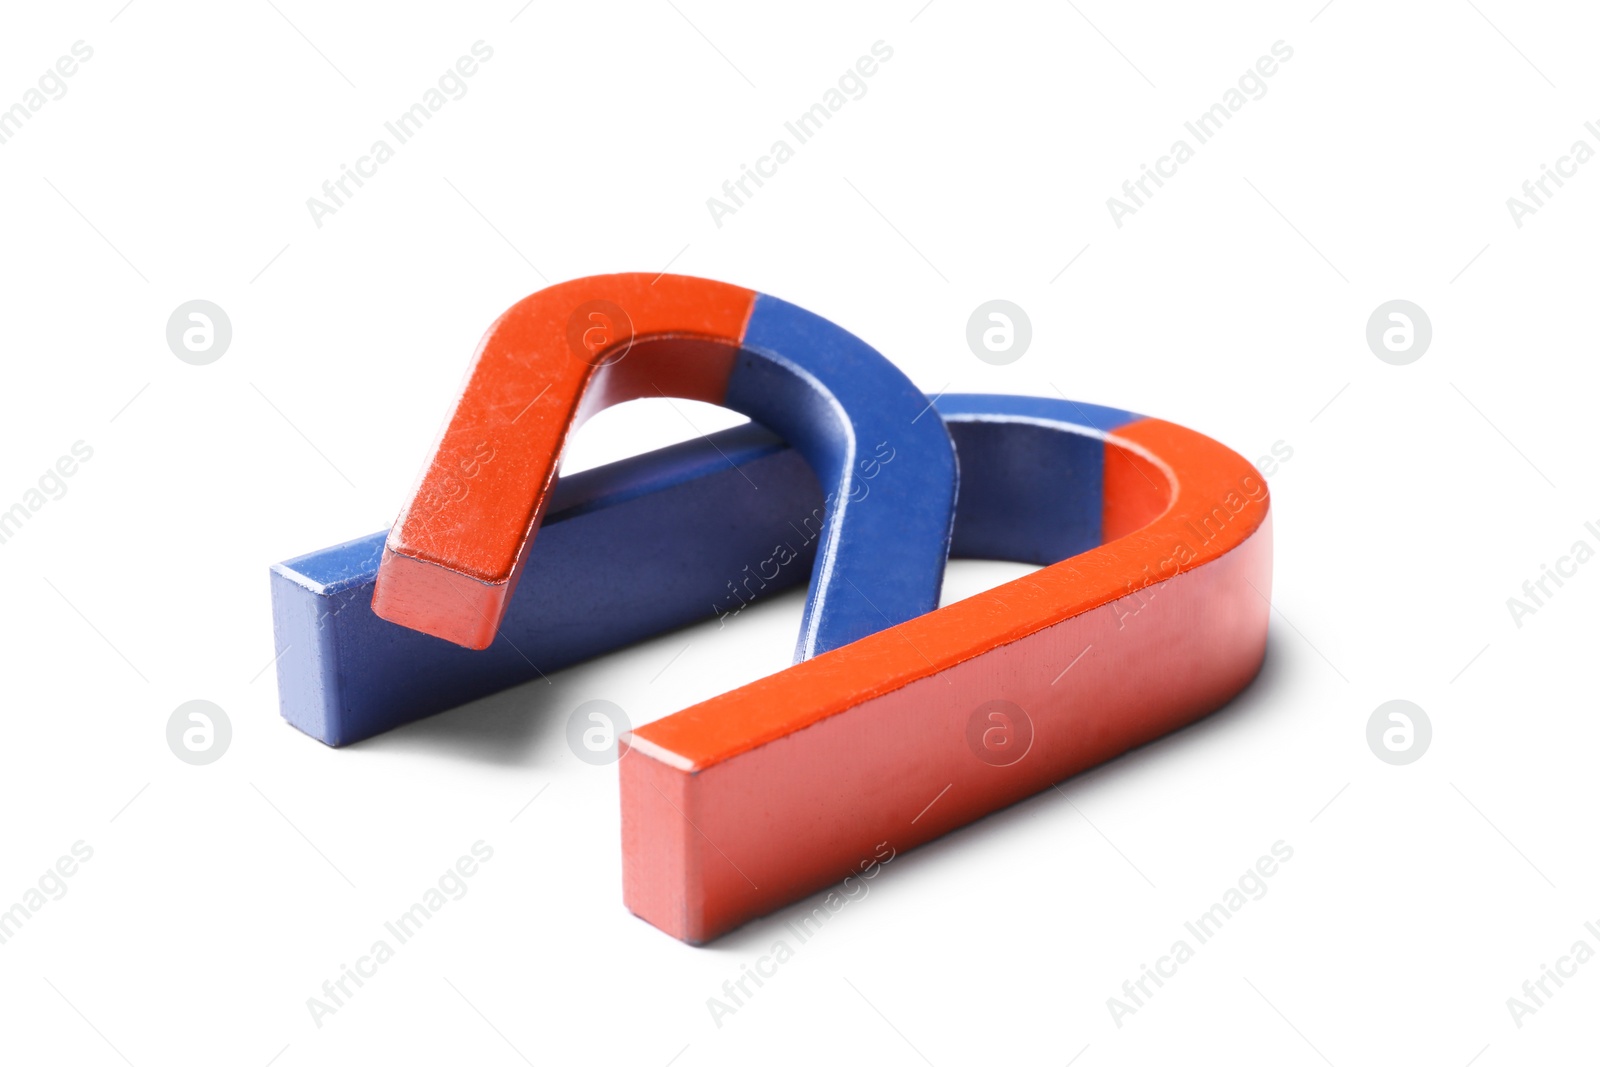 Photo of Red and blue horseshoe magnets on white background